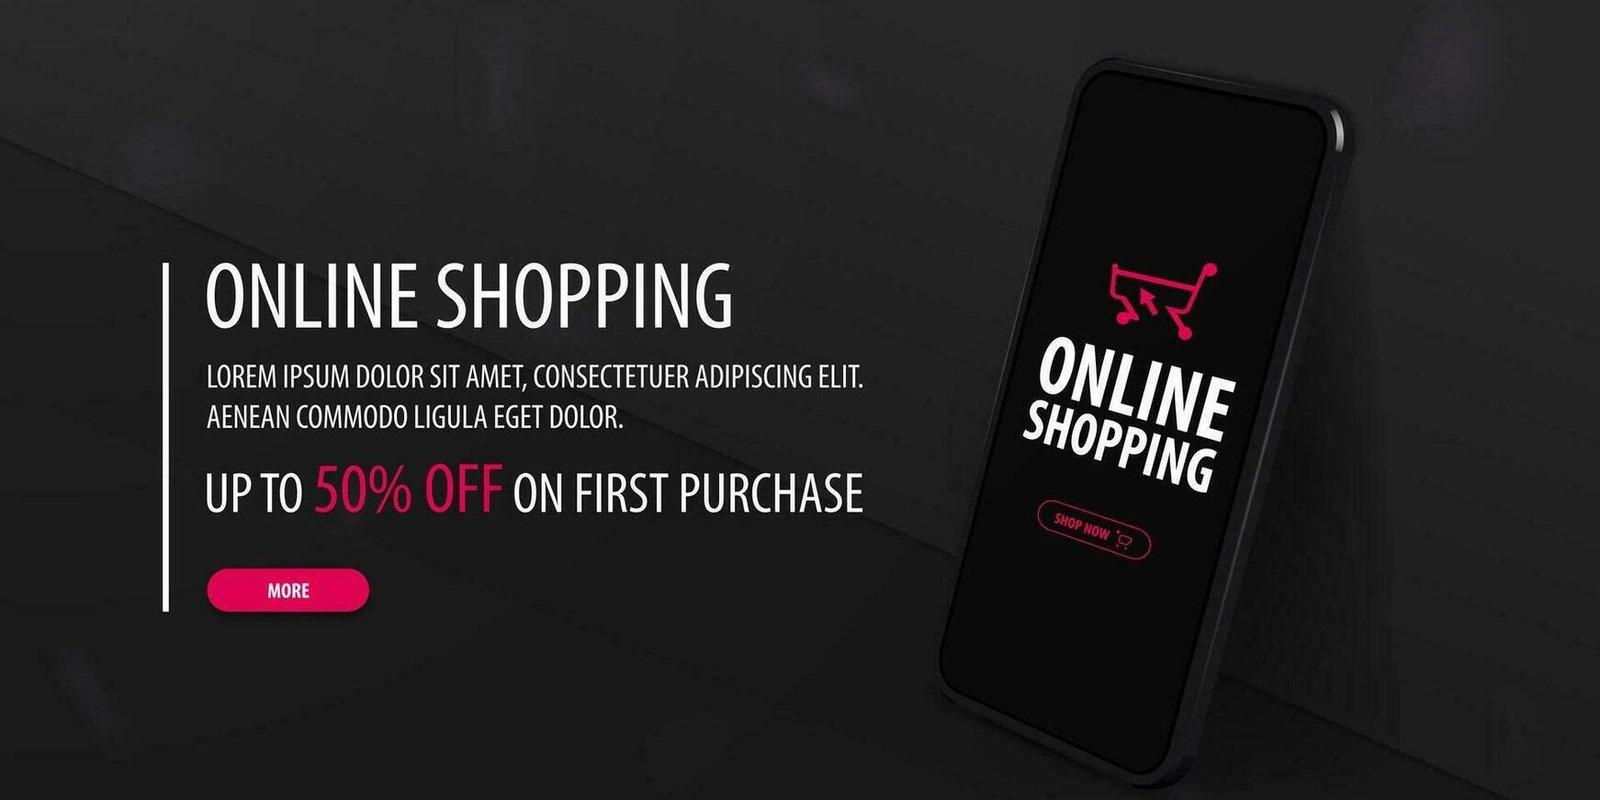 online-shopping-black-web-banner-with-offer-and-a-smartphone-on-a-dark-background-near-the-wall-vector